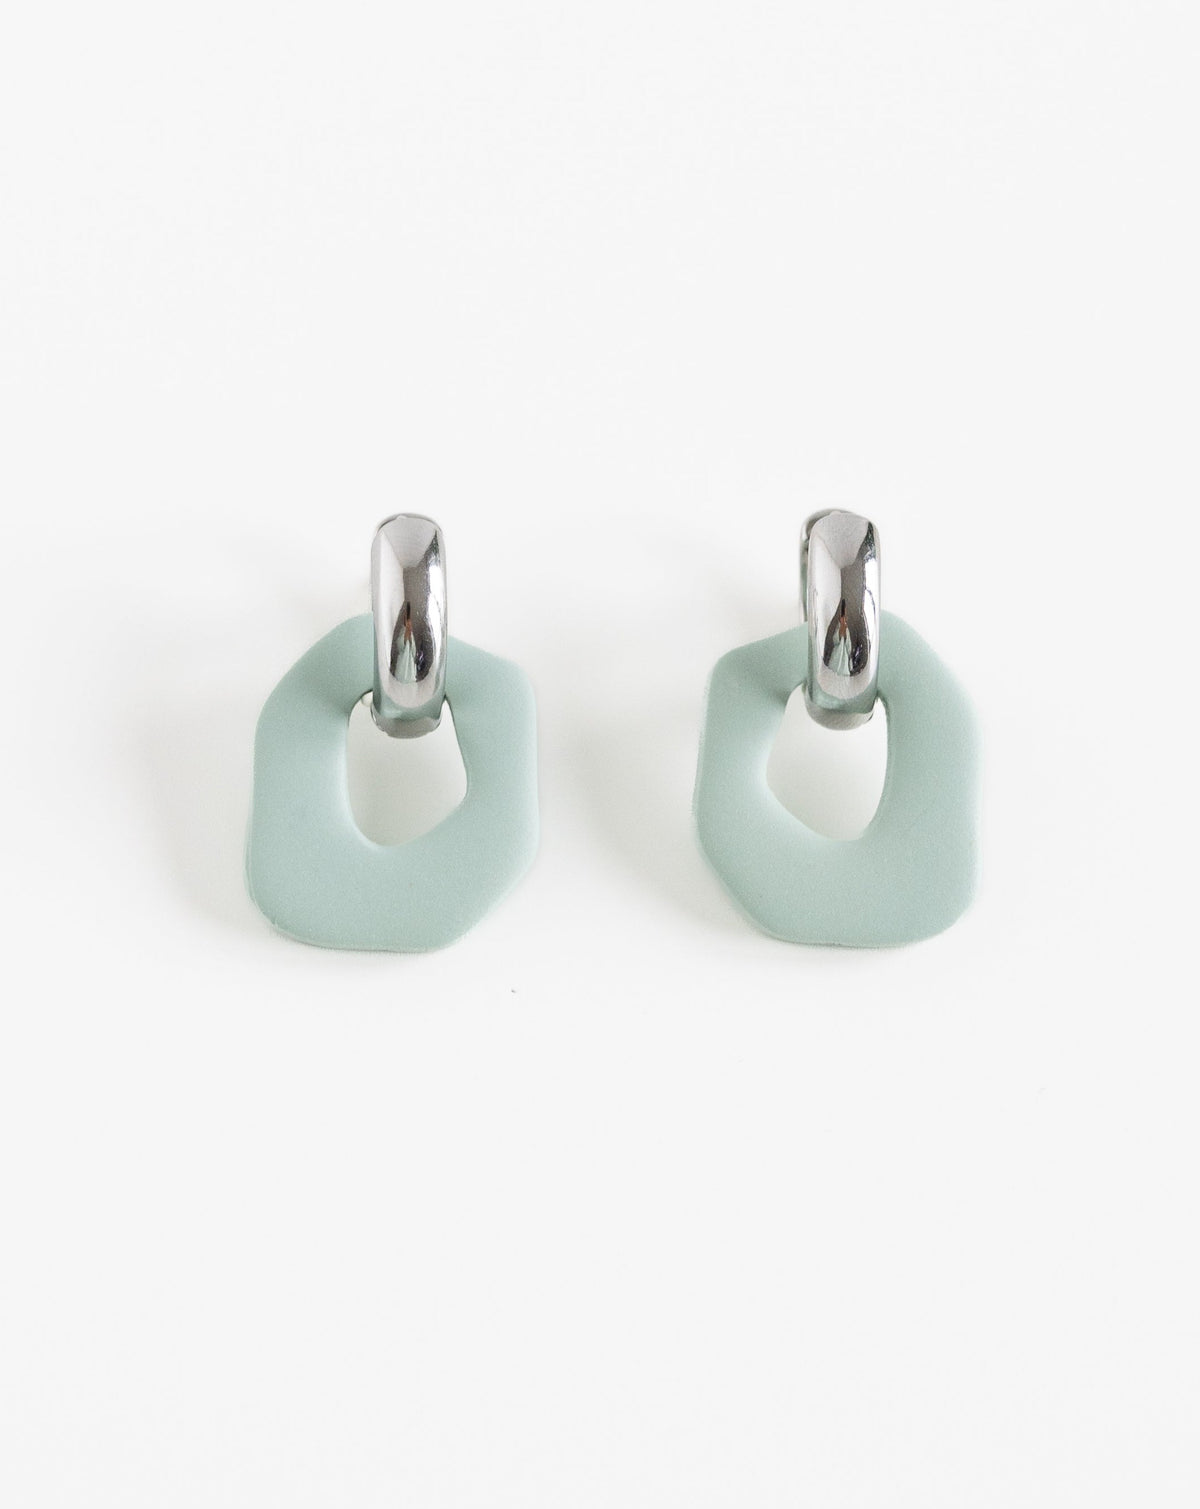 Darien earrings in Sage color with silver hoops, front view